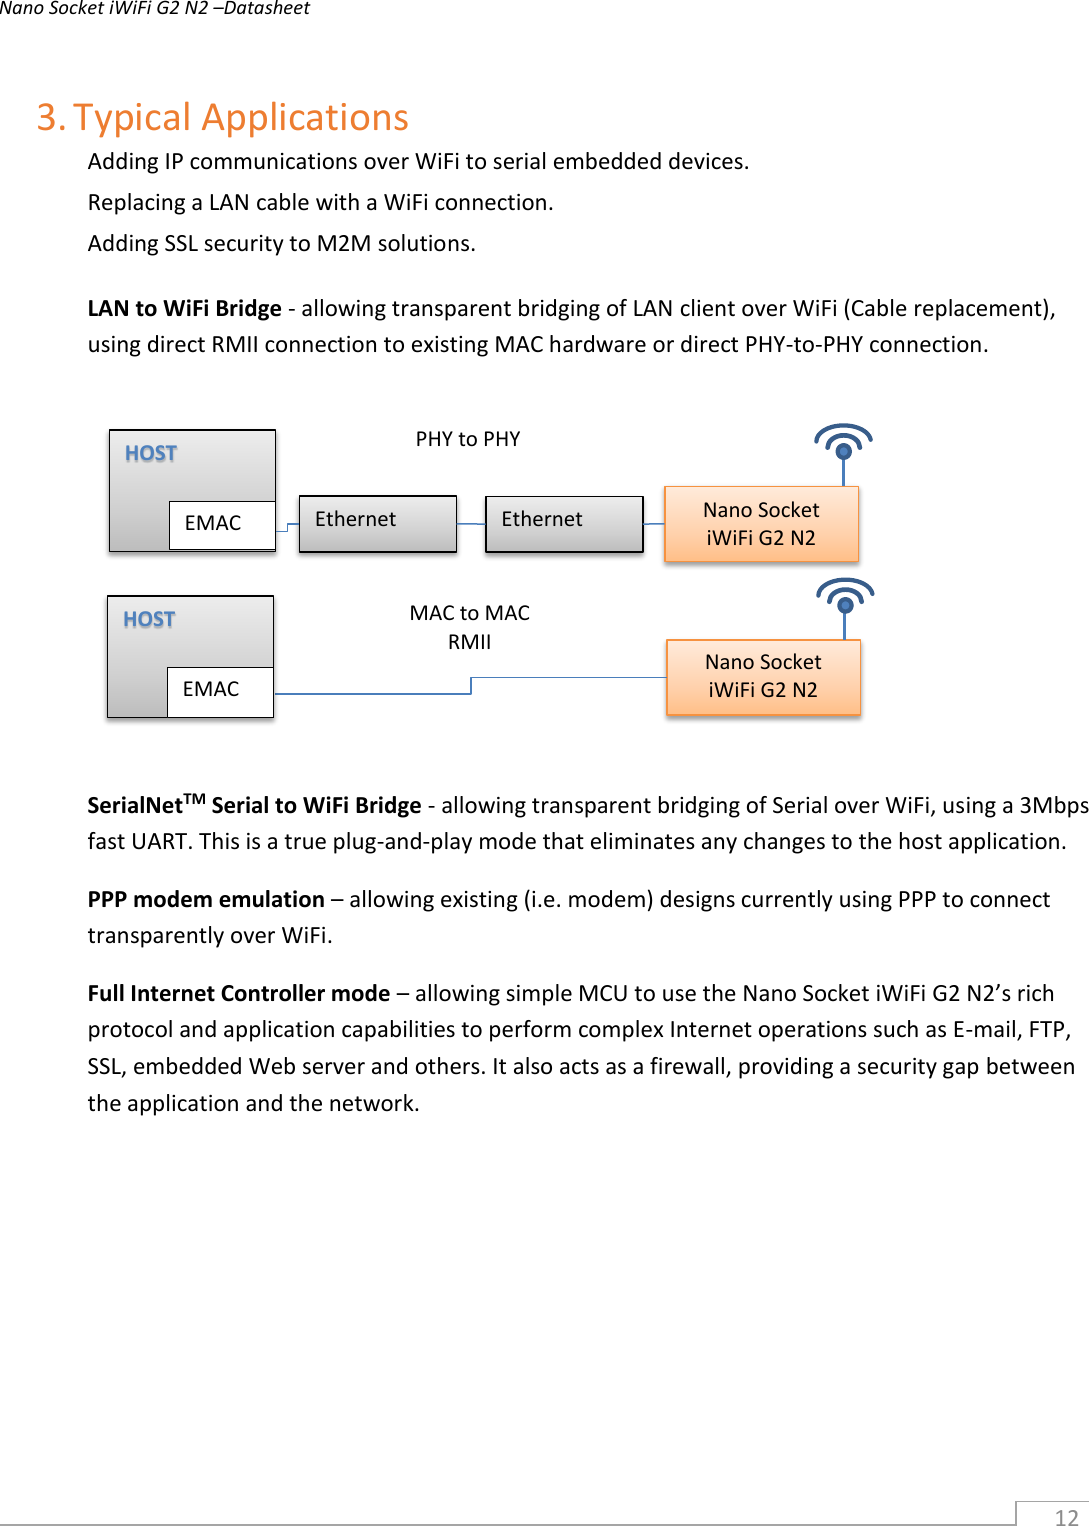 Nano Socket iWiFi G2 N2 –Datasheet 12 3. Typical ApplicationsAdding IP communications over WiFi to serial embedded devices. Replacing a LAN cable with a WiFi connection. Adding SSL security to M2M solutions. LAN to WiFi Bridge - allowing transparent bridging of LAN client over WiFi (Cable replacement), using direct RMII connection to existing MAC hardware or direct PHY-to-PHY connection. SerialNetTM Serial to WiFi Bridge - allowing transparent bridging of Serial over WiFi, using a 3Mbps fast UART. This is a true plug-and-play mode that eliminates any changes to the host application. PPP modem emulation – allowing existing (i.e. modem) designs currently using PPP to connect transparently over WiFi. Full Internet Controller mode – allowing simple MCU to use the Nano Socket iWiFi G2 N2’s rich protocol and application capabilities to perform complex Internet operations such as E-mail, FTP, SSL, embedded Web server and others. It also acts as a firewall, providing a security gap between the application and the network. HOST EMAC Ethernet Ethernet Nano Socket iWiFi G2 N2 Nano Socket iWiFi G2 N2 MAC to MAC RMII PHY to PHY HOST EMAC 